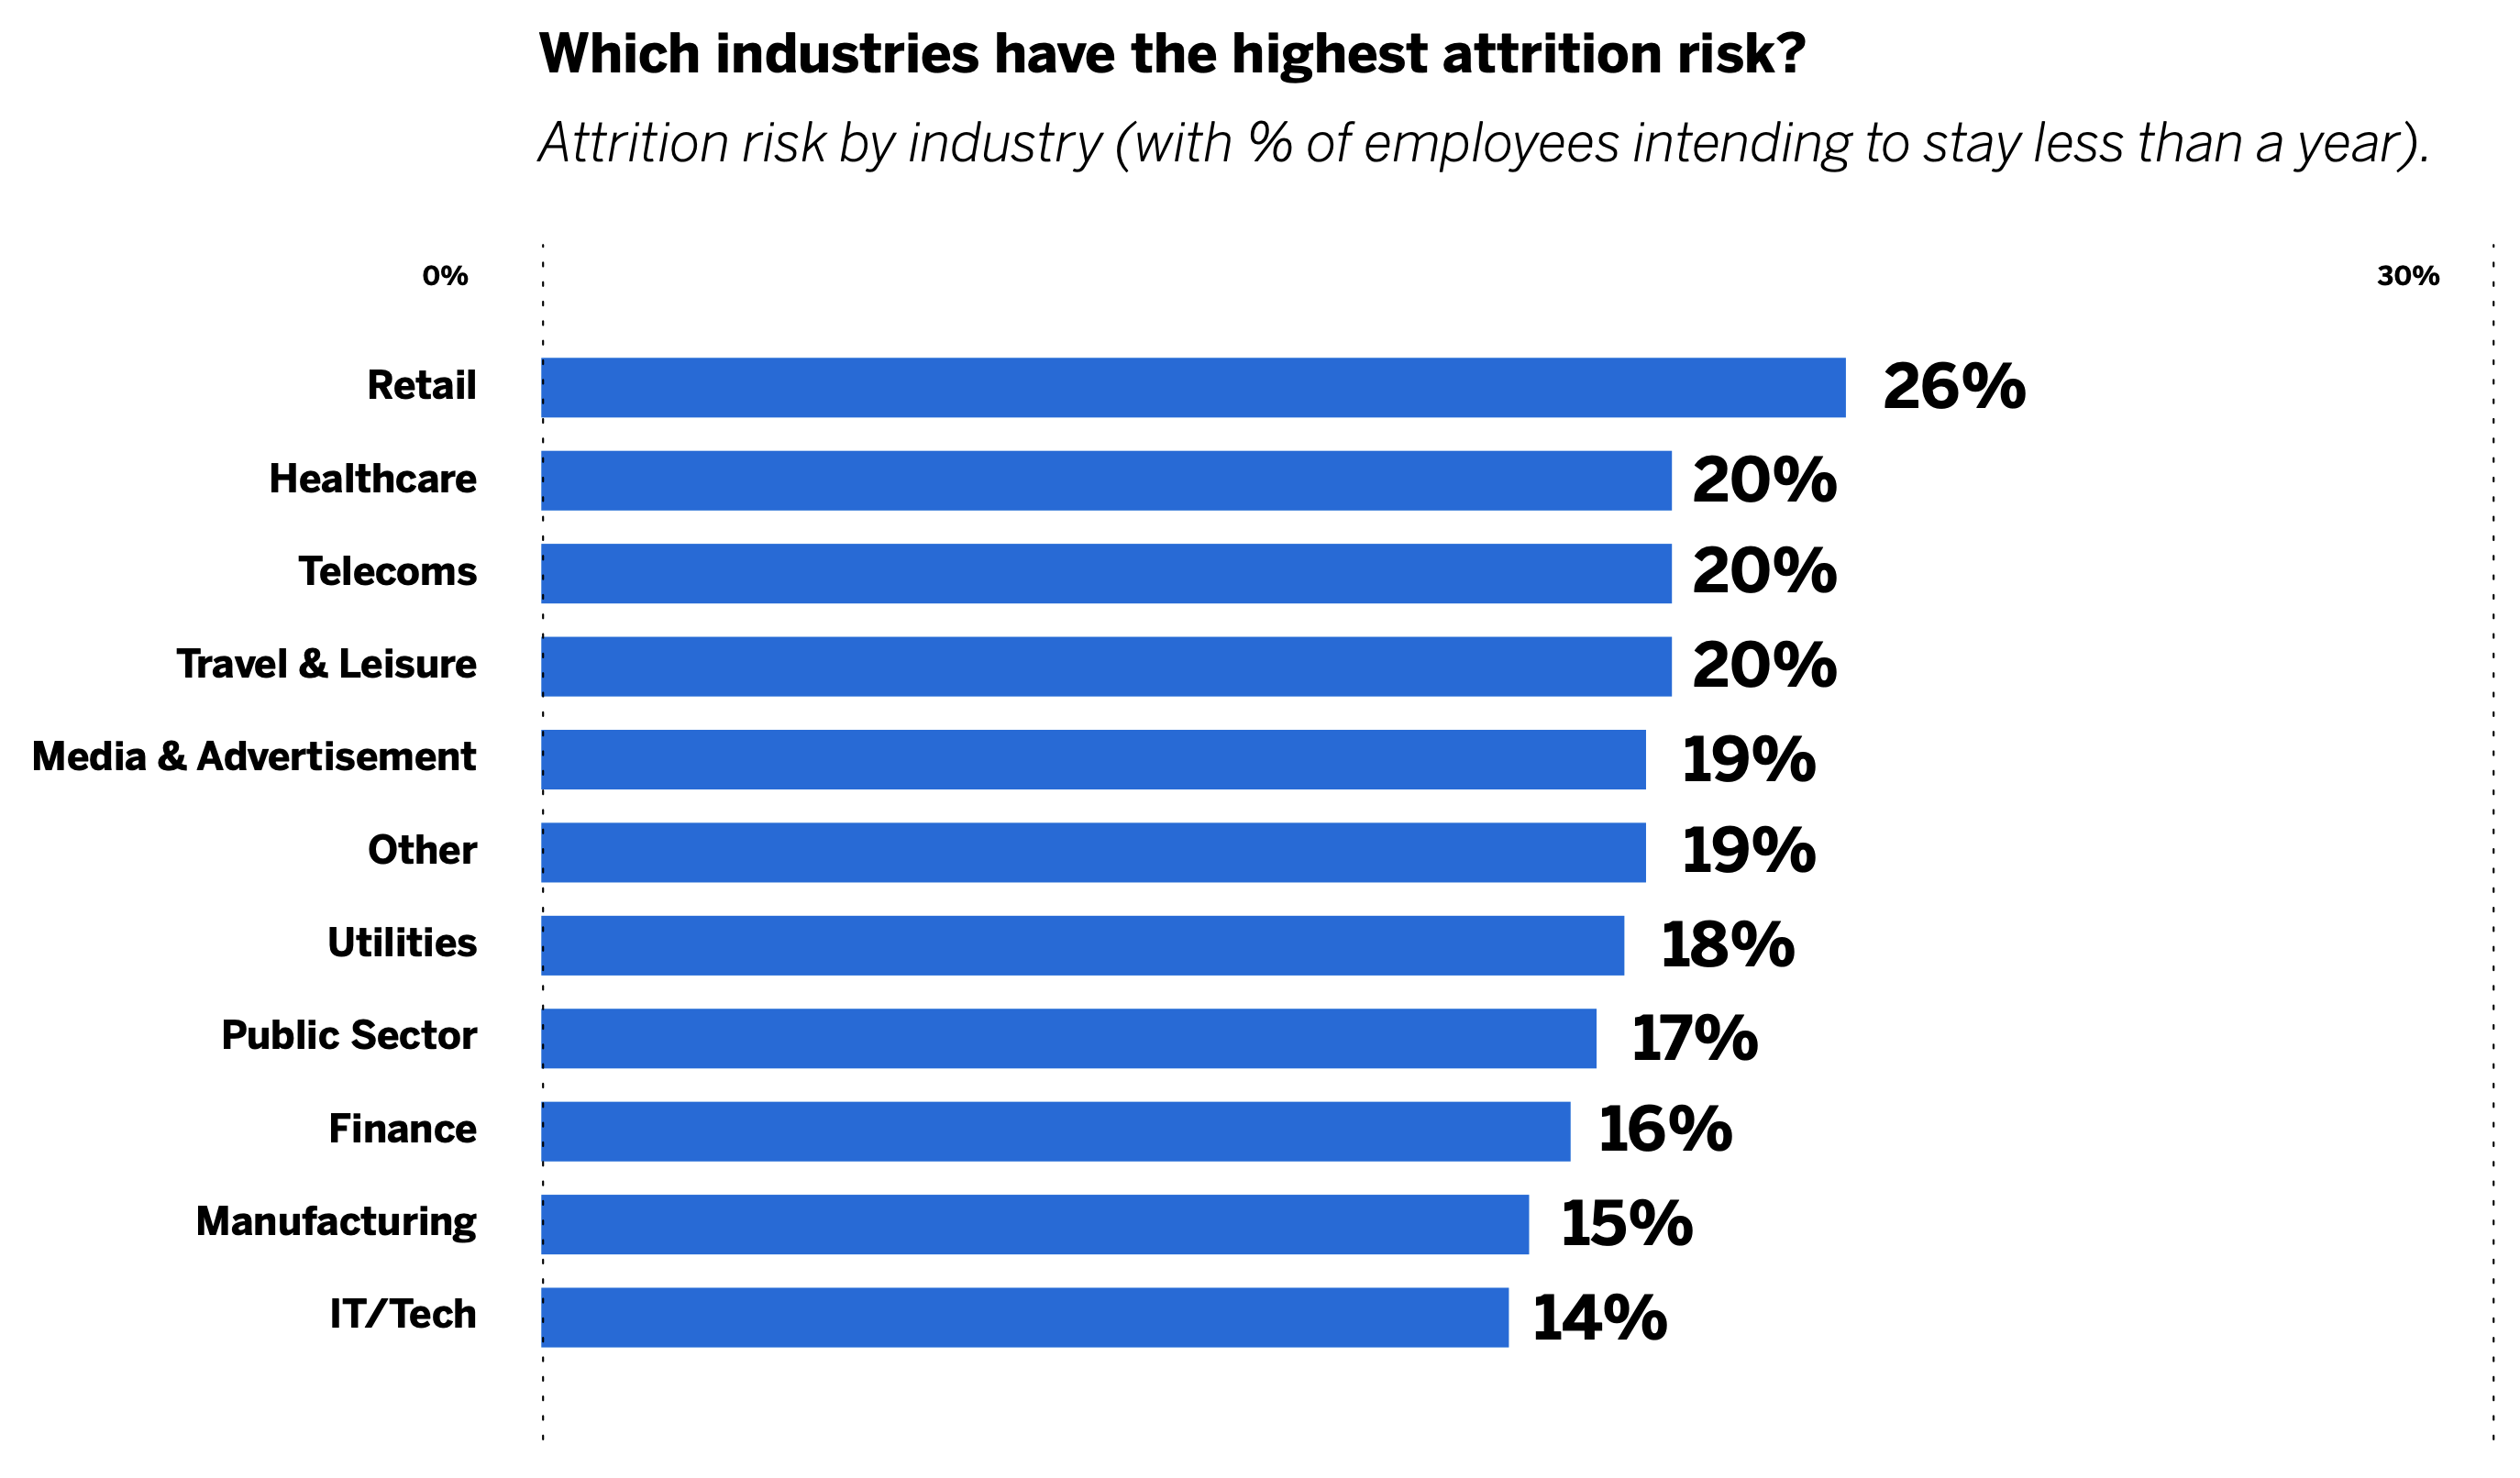 industries by attrition risk